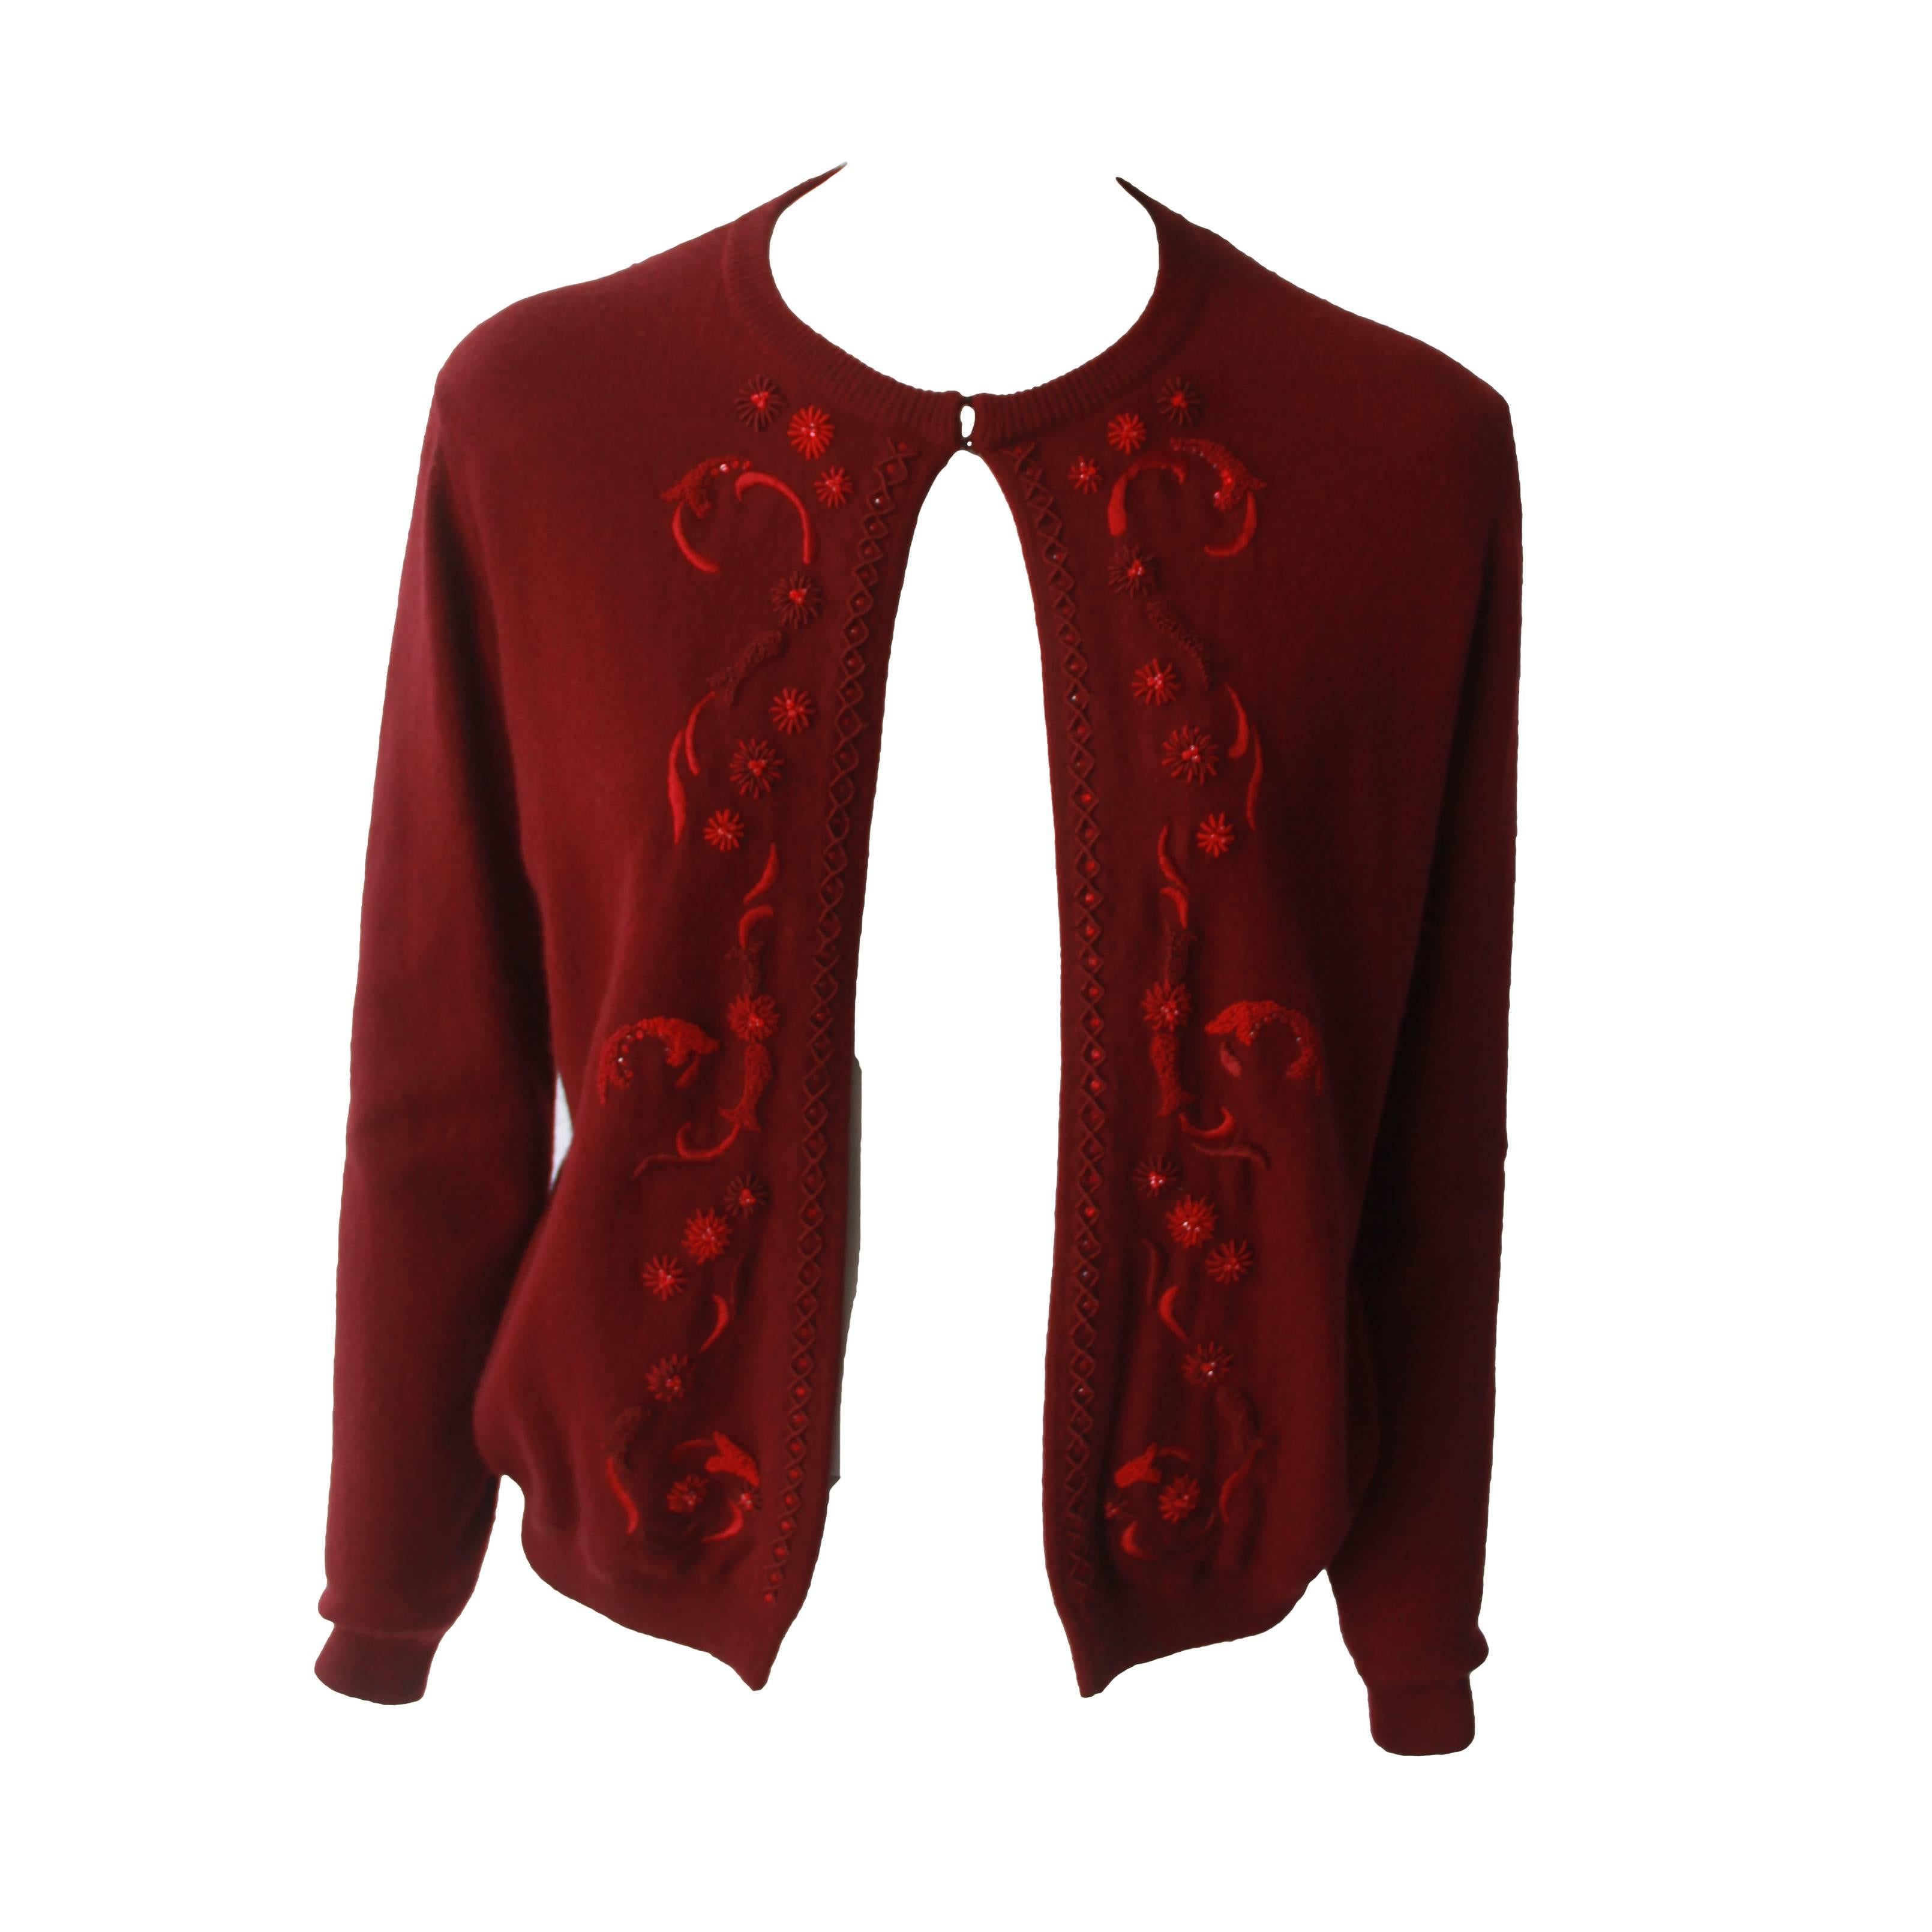 Atelier Versace Hand Embroidered Beaded Cardigan Fall 1997 For Sale